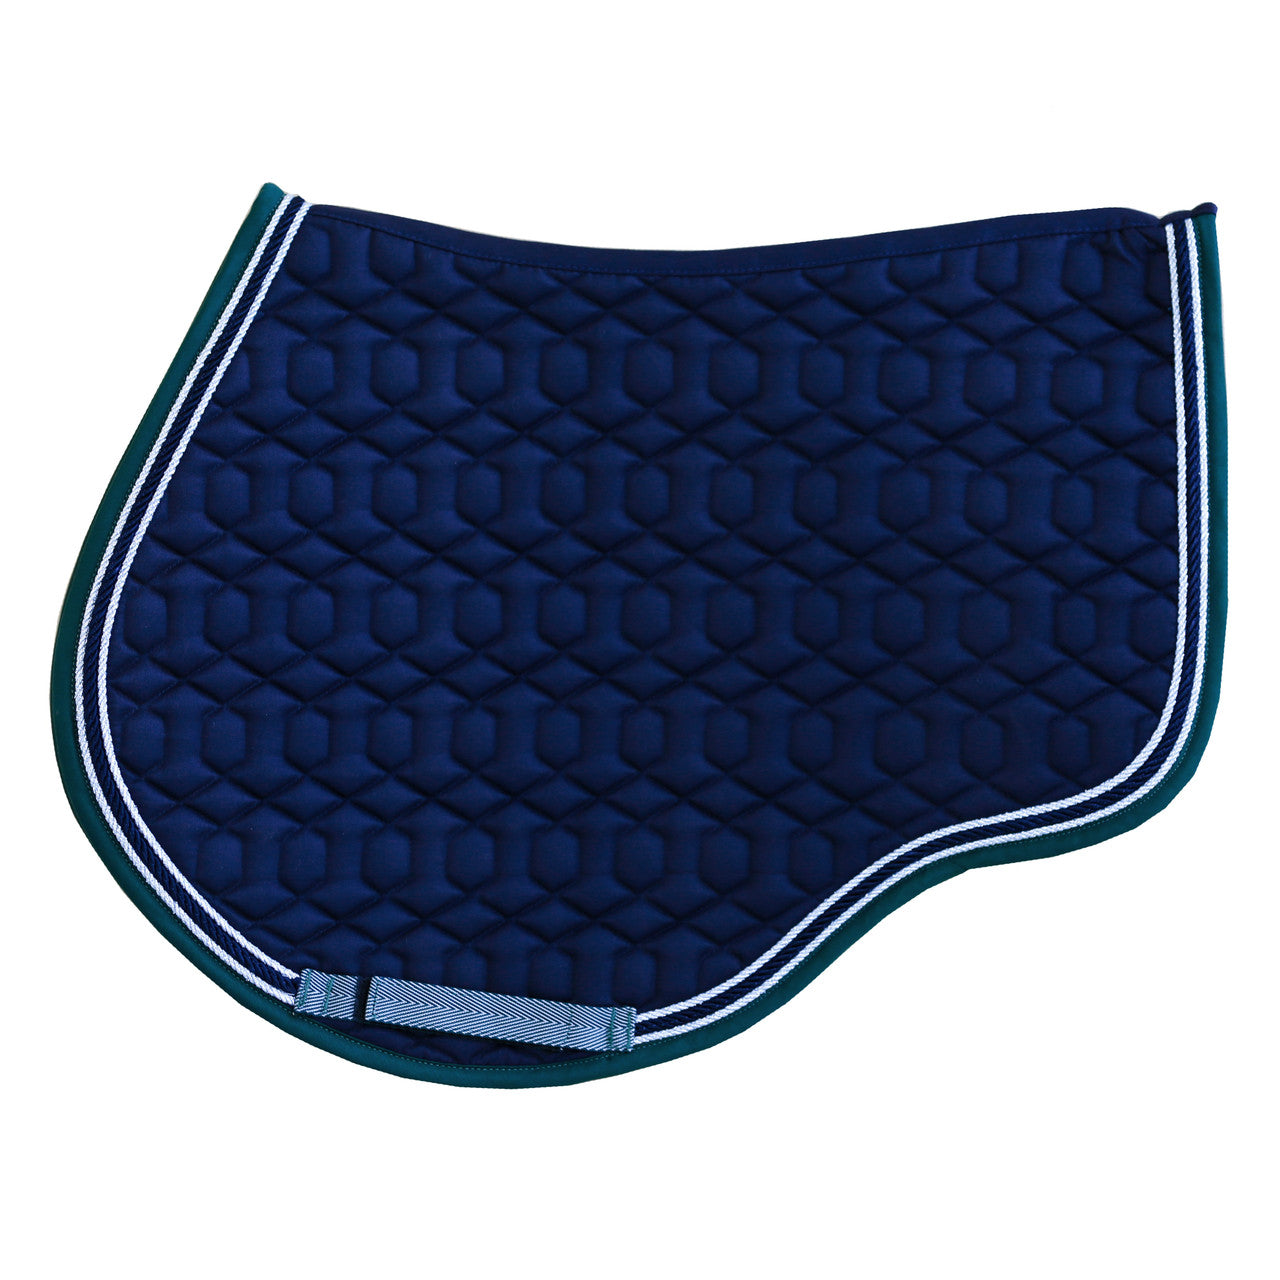 AP Saddle Pad - Navy / Green w Silver and Navy Cord